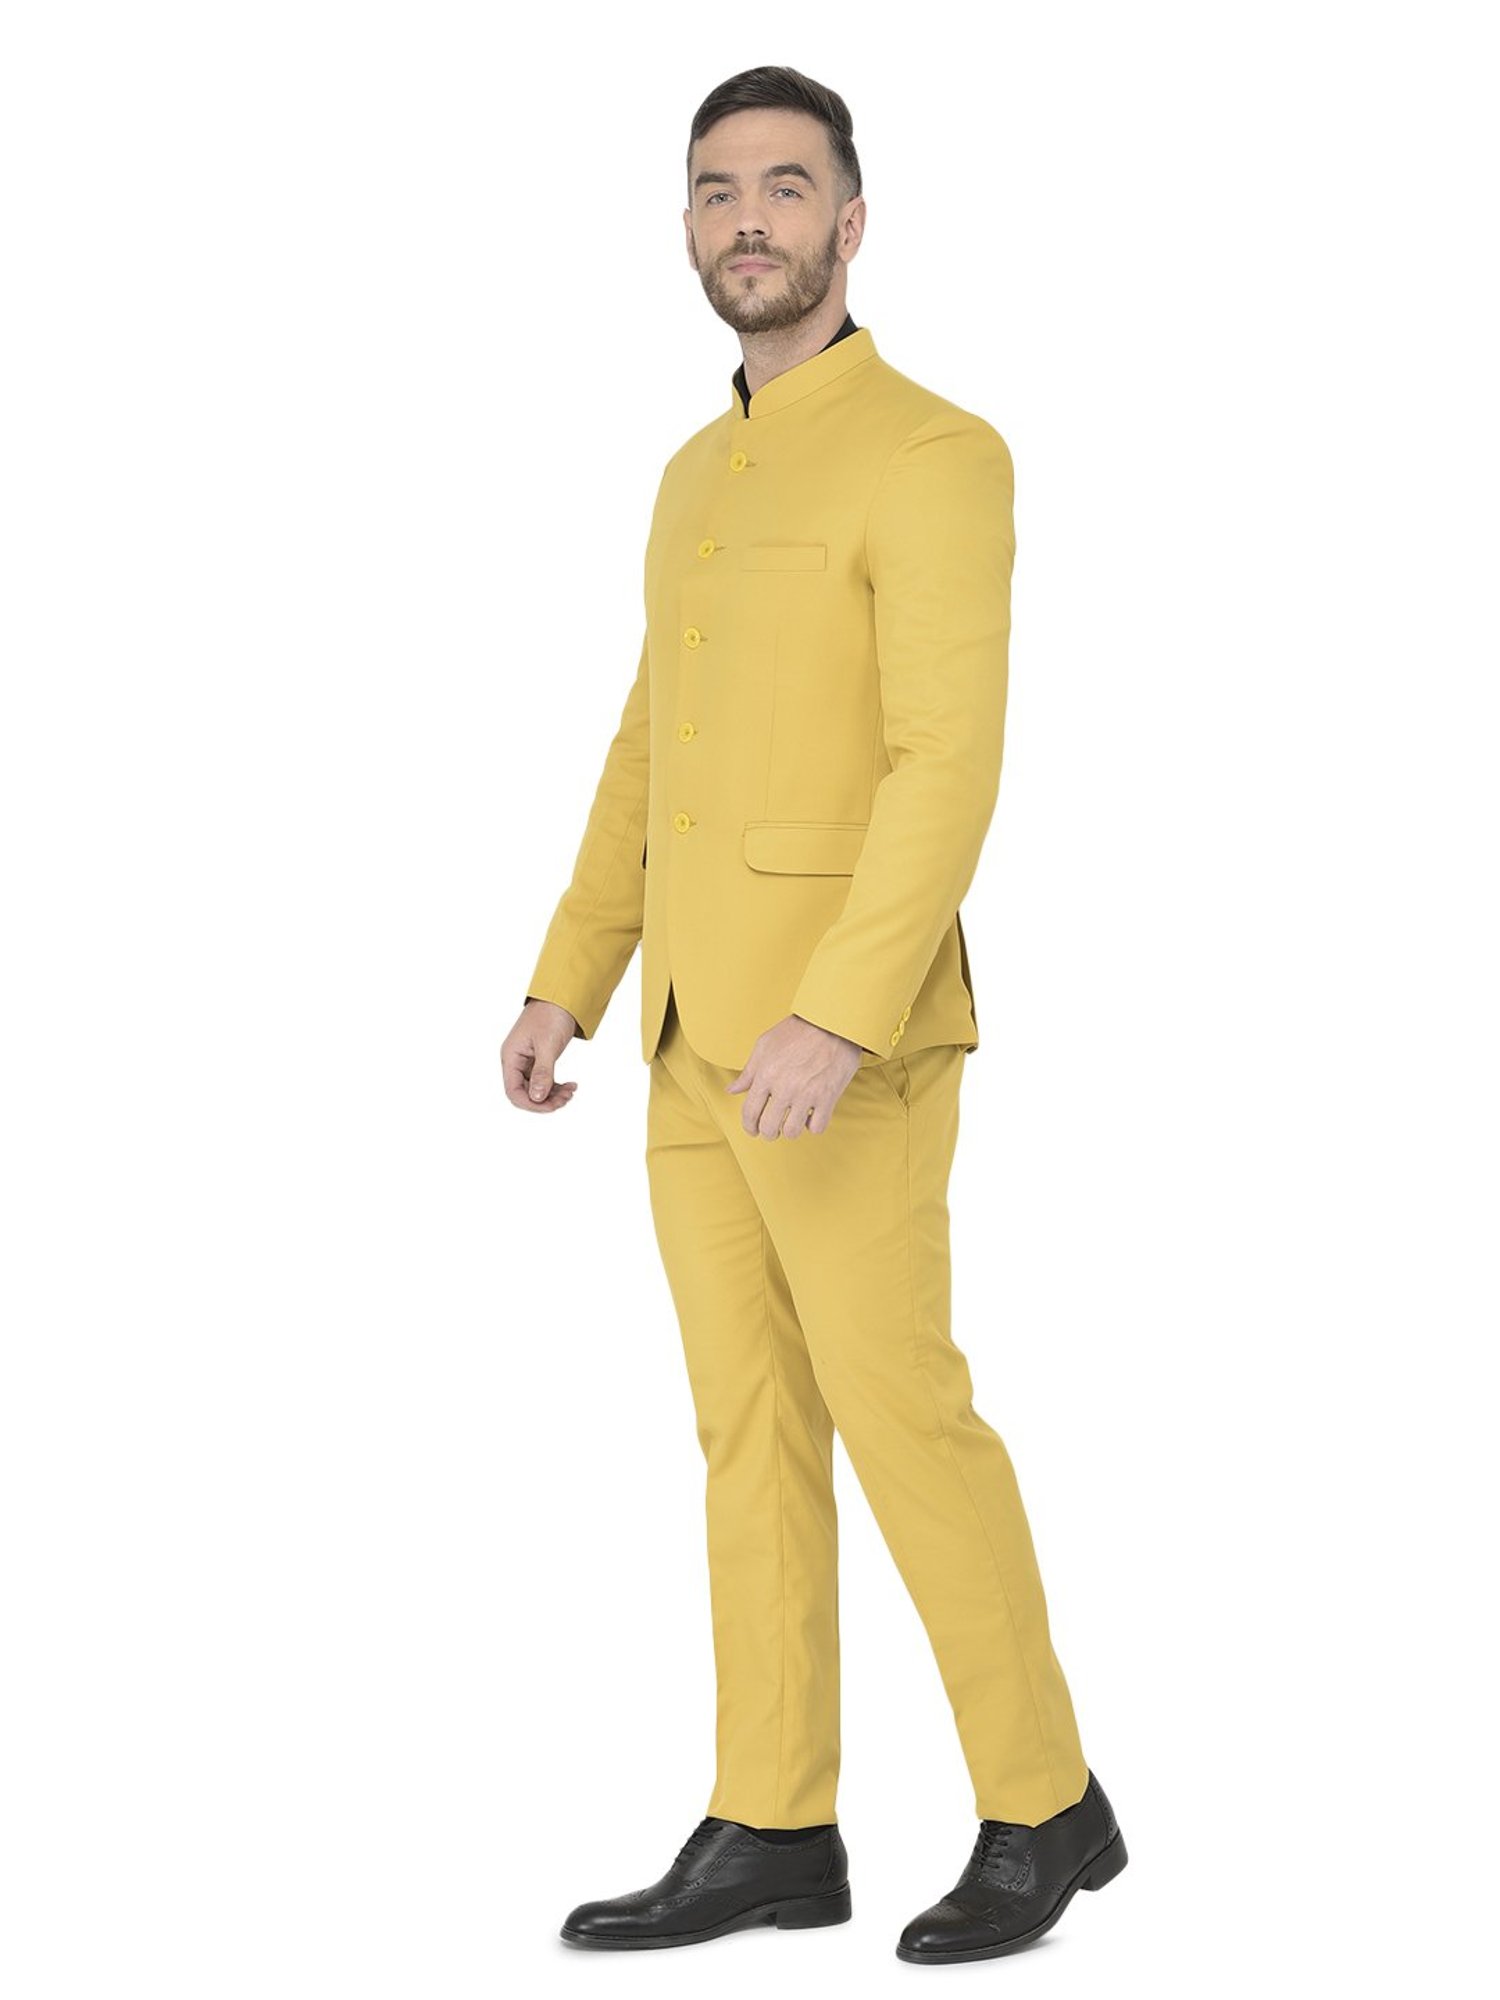 HOTK Men's Suits 2 Pieces Yellow Shawl Lapel Groom Jacket with Pants  Wedding Business Suit at Amazon Men's Clothing store